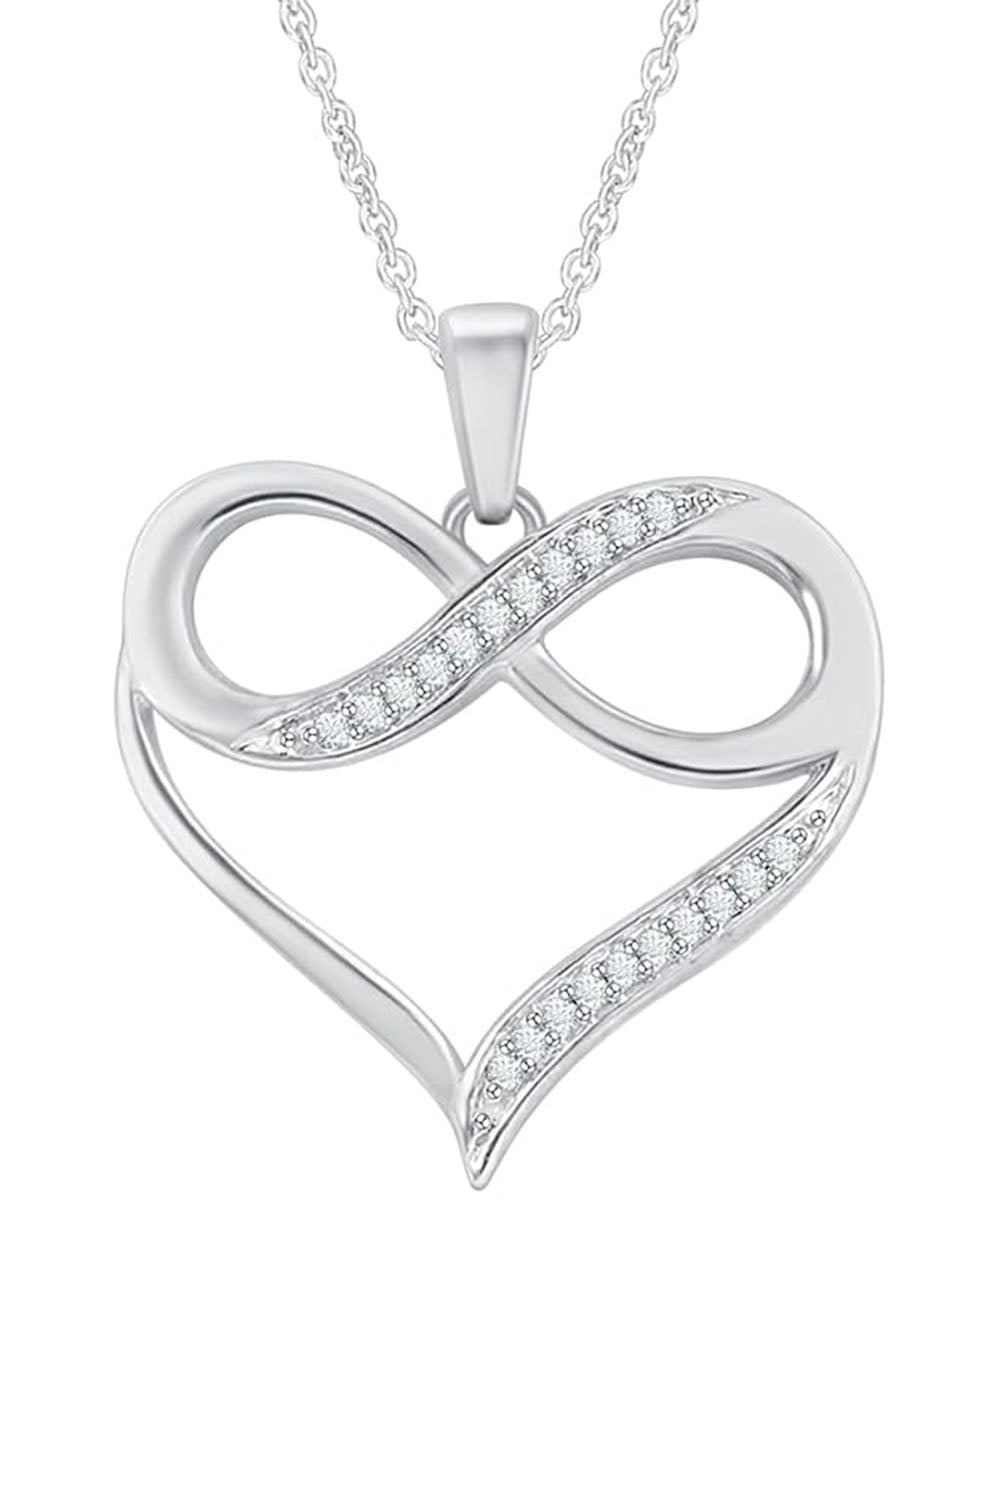 White Gold Color Heart with Infinity Pendant Necklace, Infinity Necklace